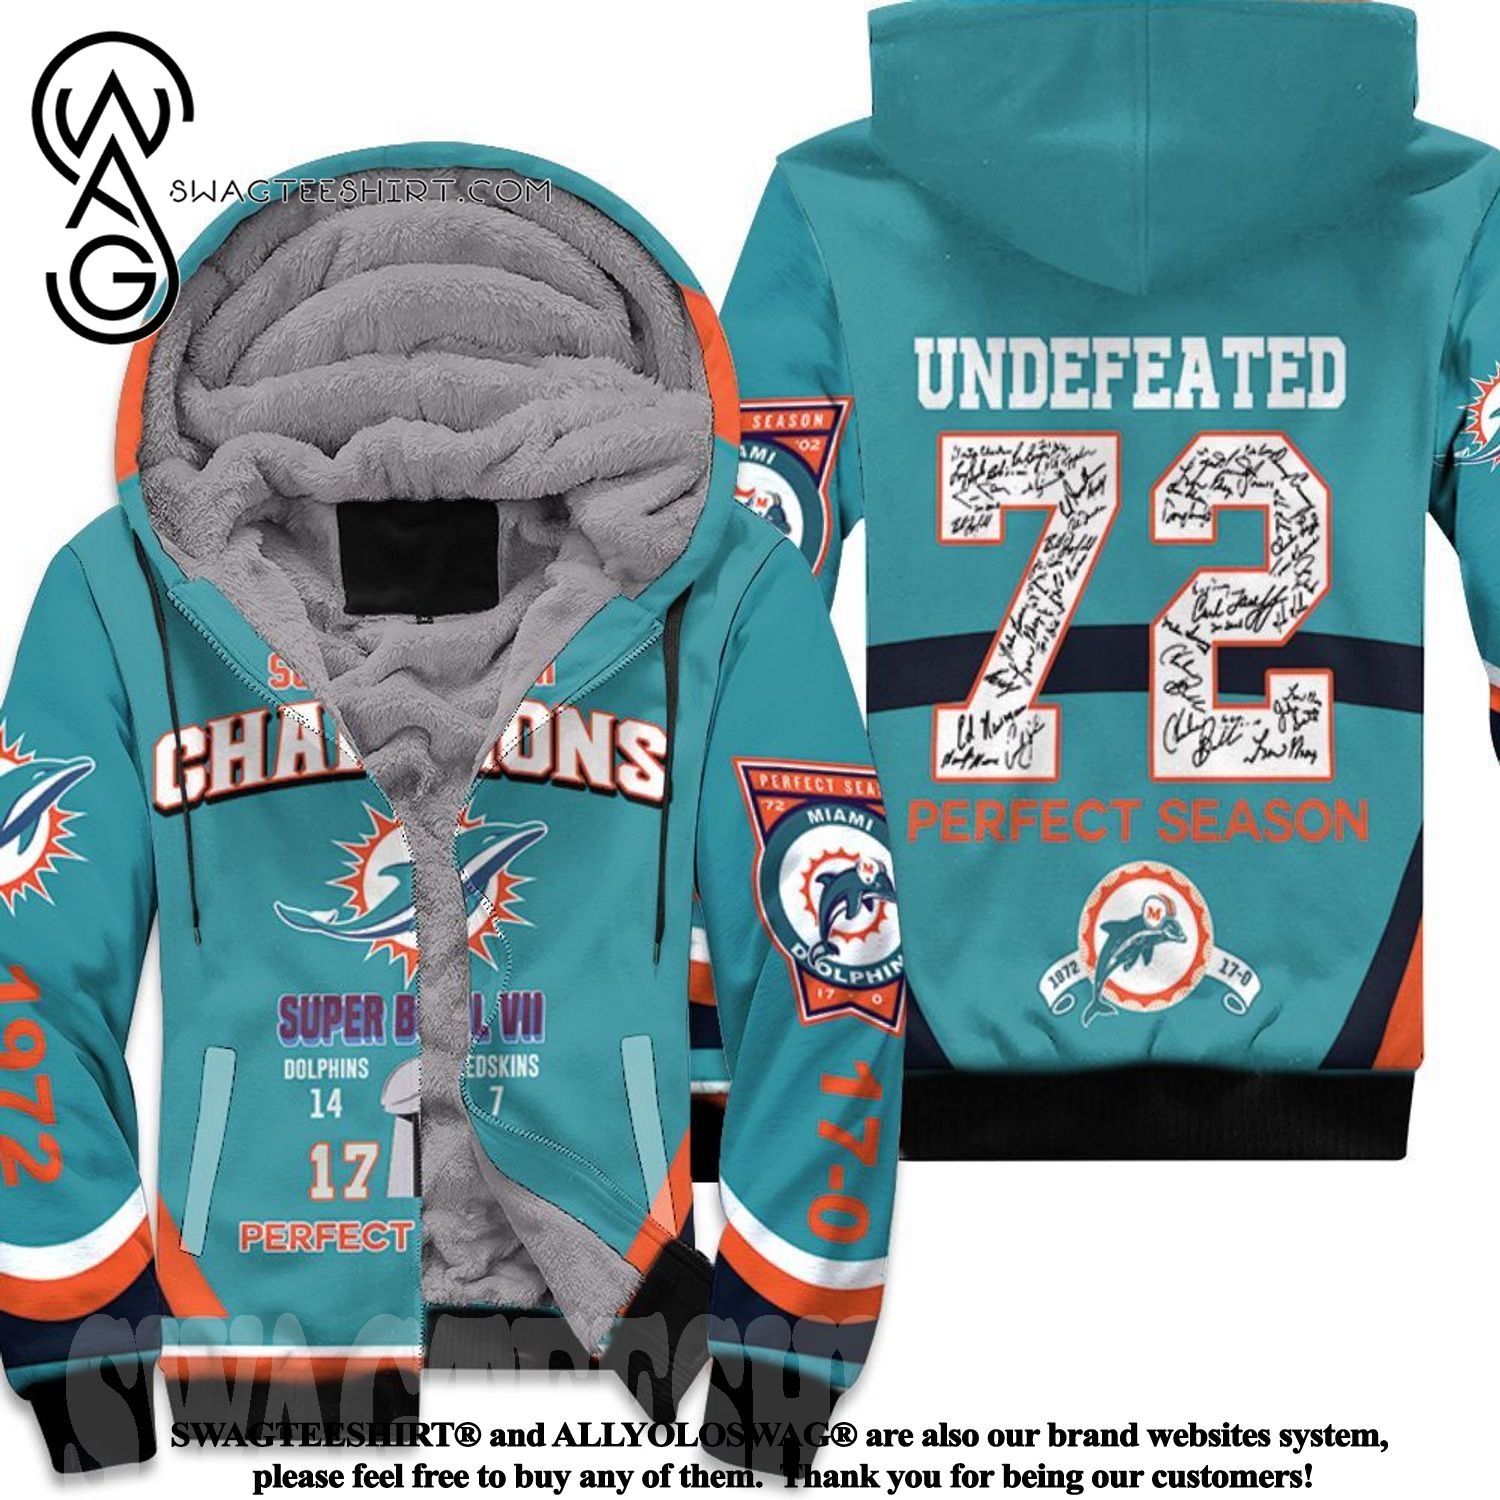 Dolphins Super Bowl Vii Champions 1972 Season Undefeated Hoodie New Fashion Full Printed Fleece Hoodie